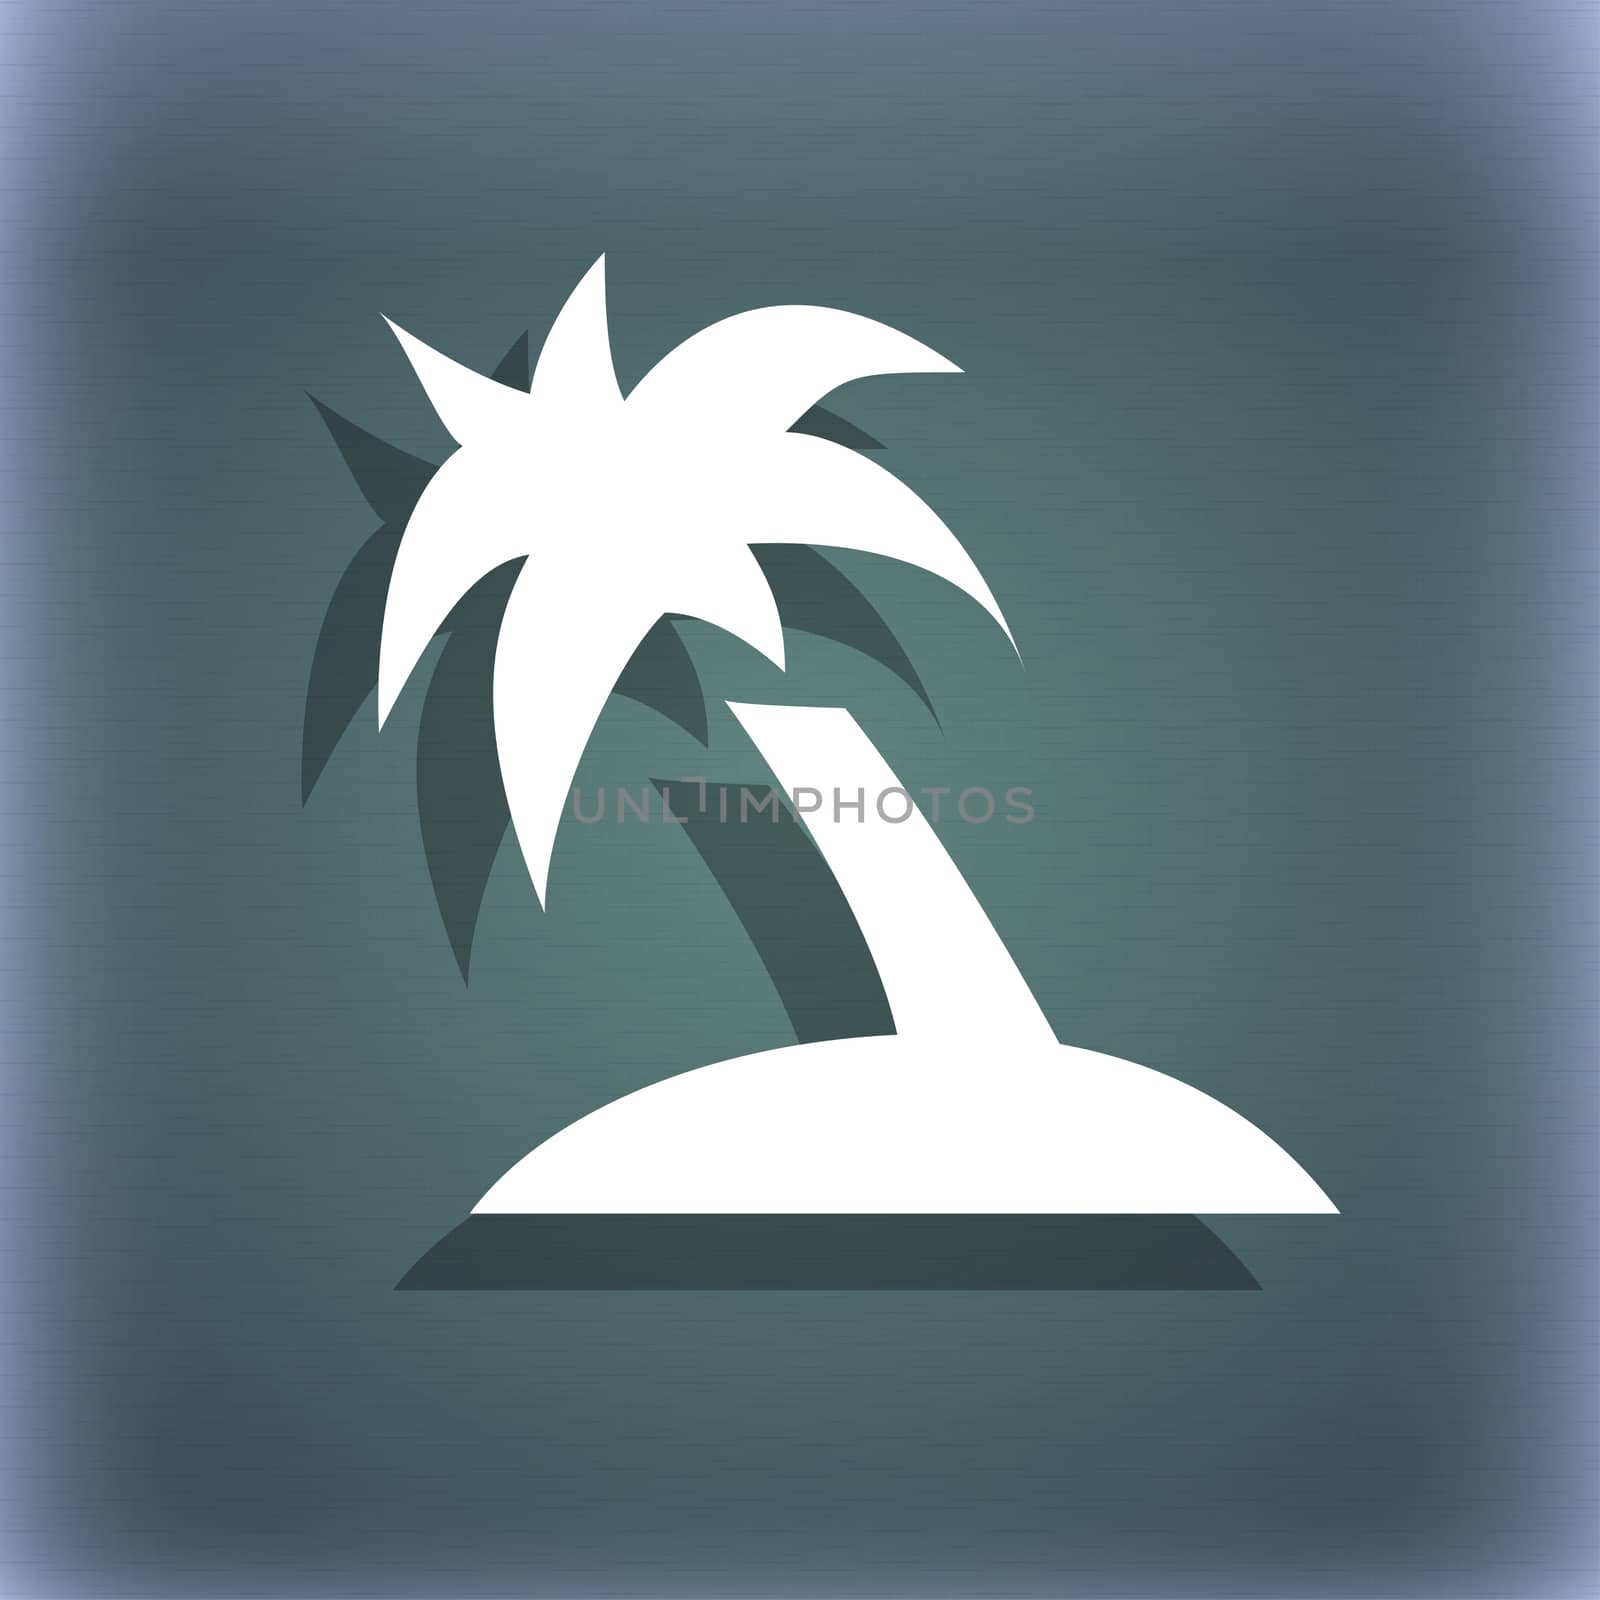 Palm Tree, Travel trip icon symbol on the blue-green abstract background with shadow and space for your text.  by serhii_lohvyniuk